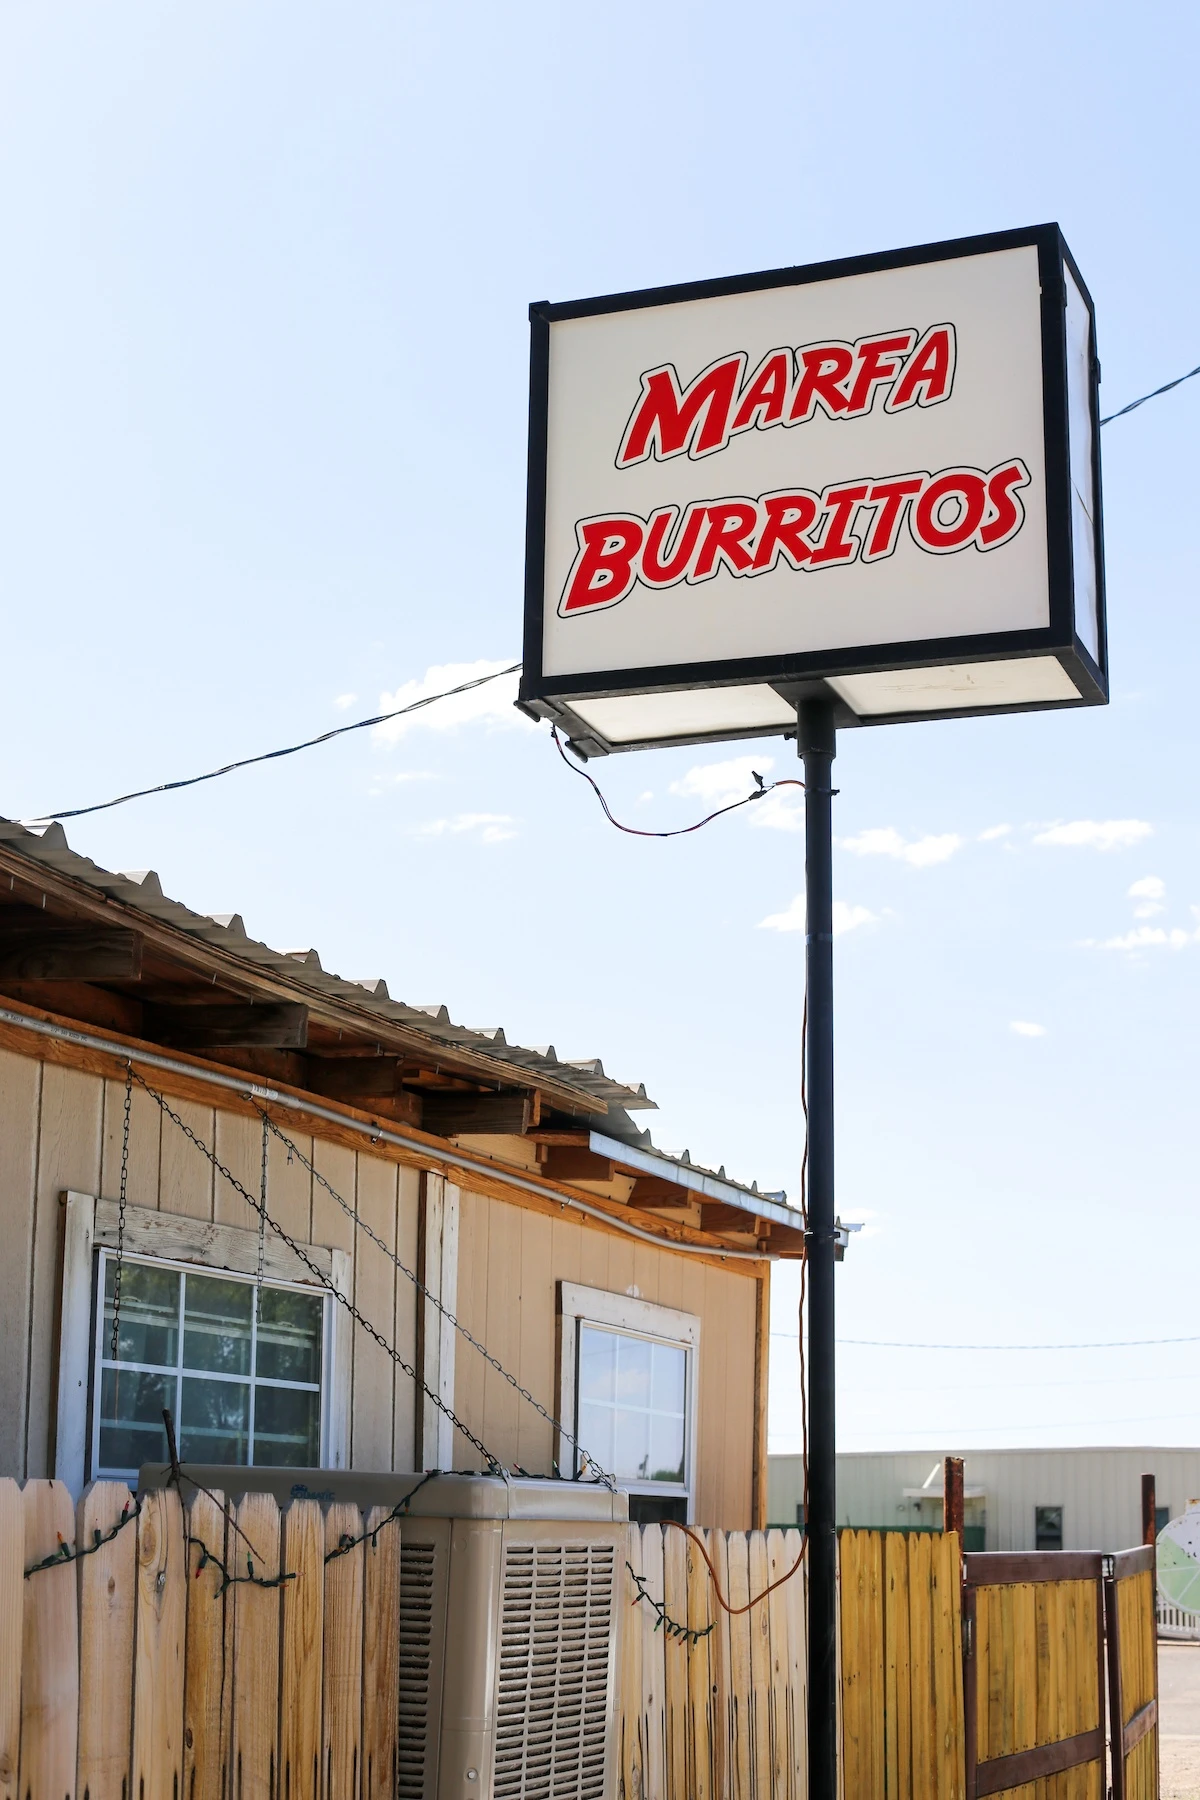 Roadside sign reads "Marfa Burrito" in red letters on white background in front of a beige colored house